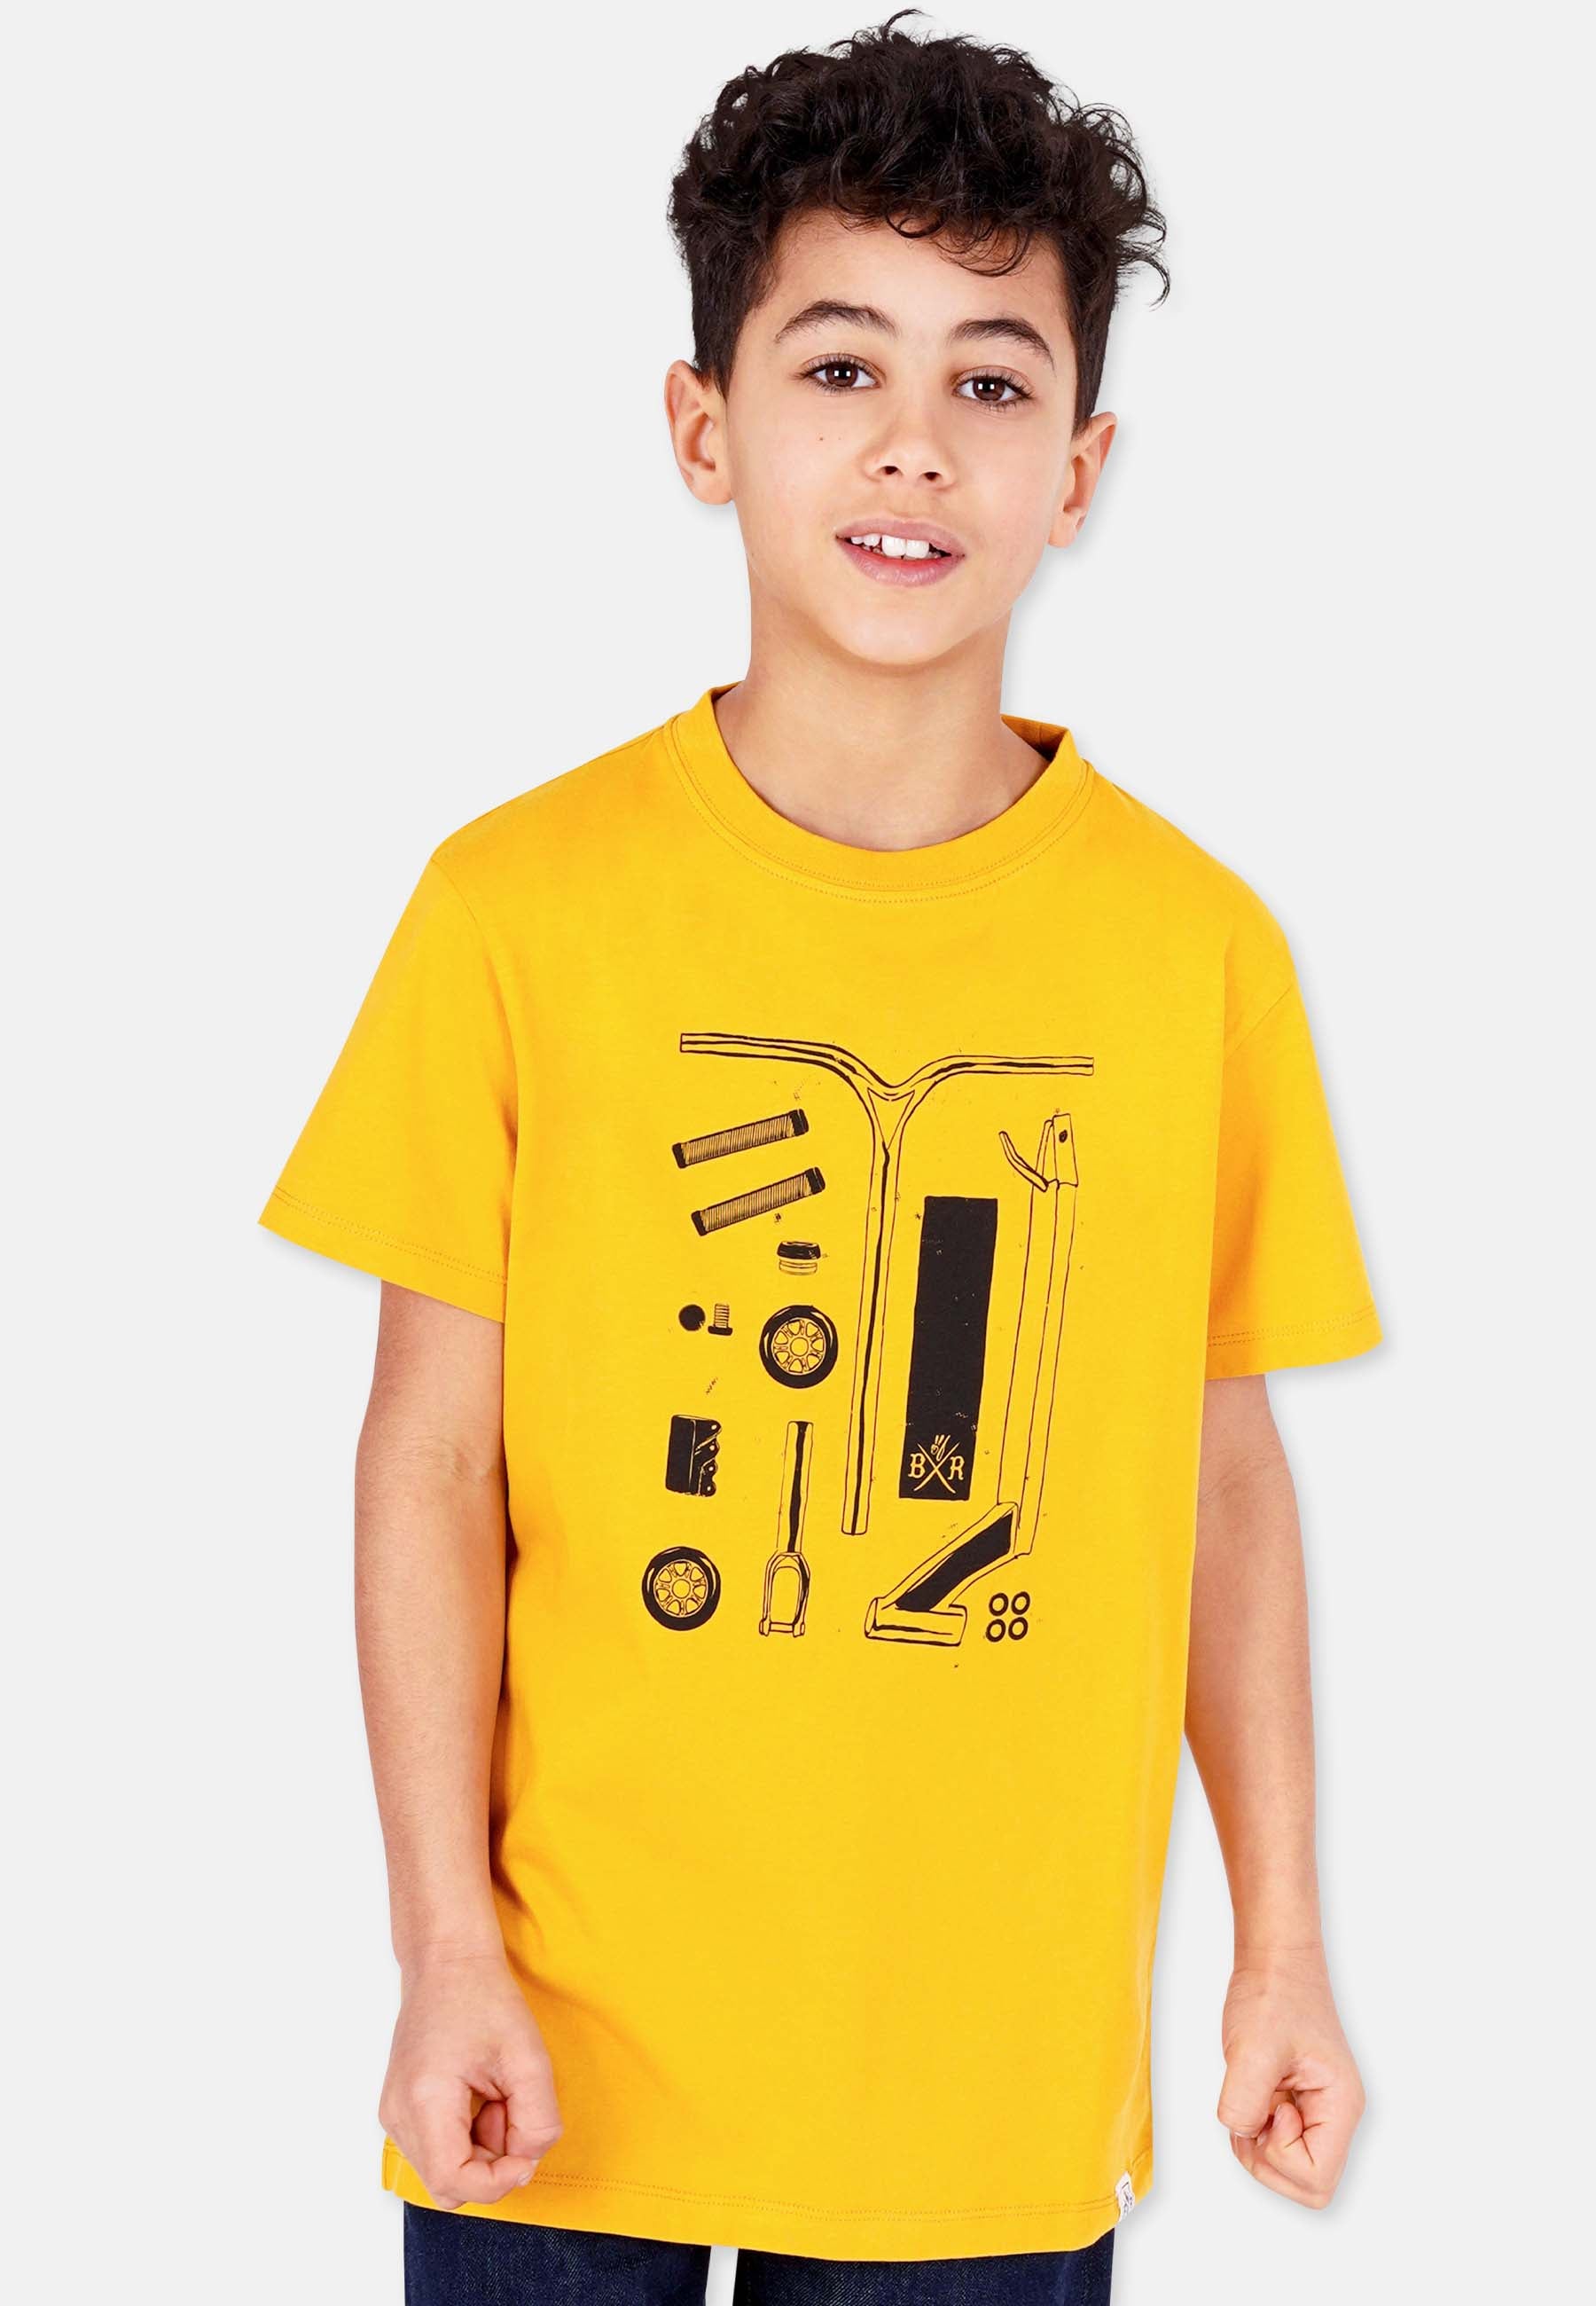 Scooter Parts T-Shirt